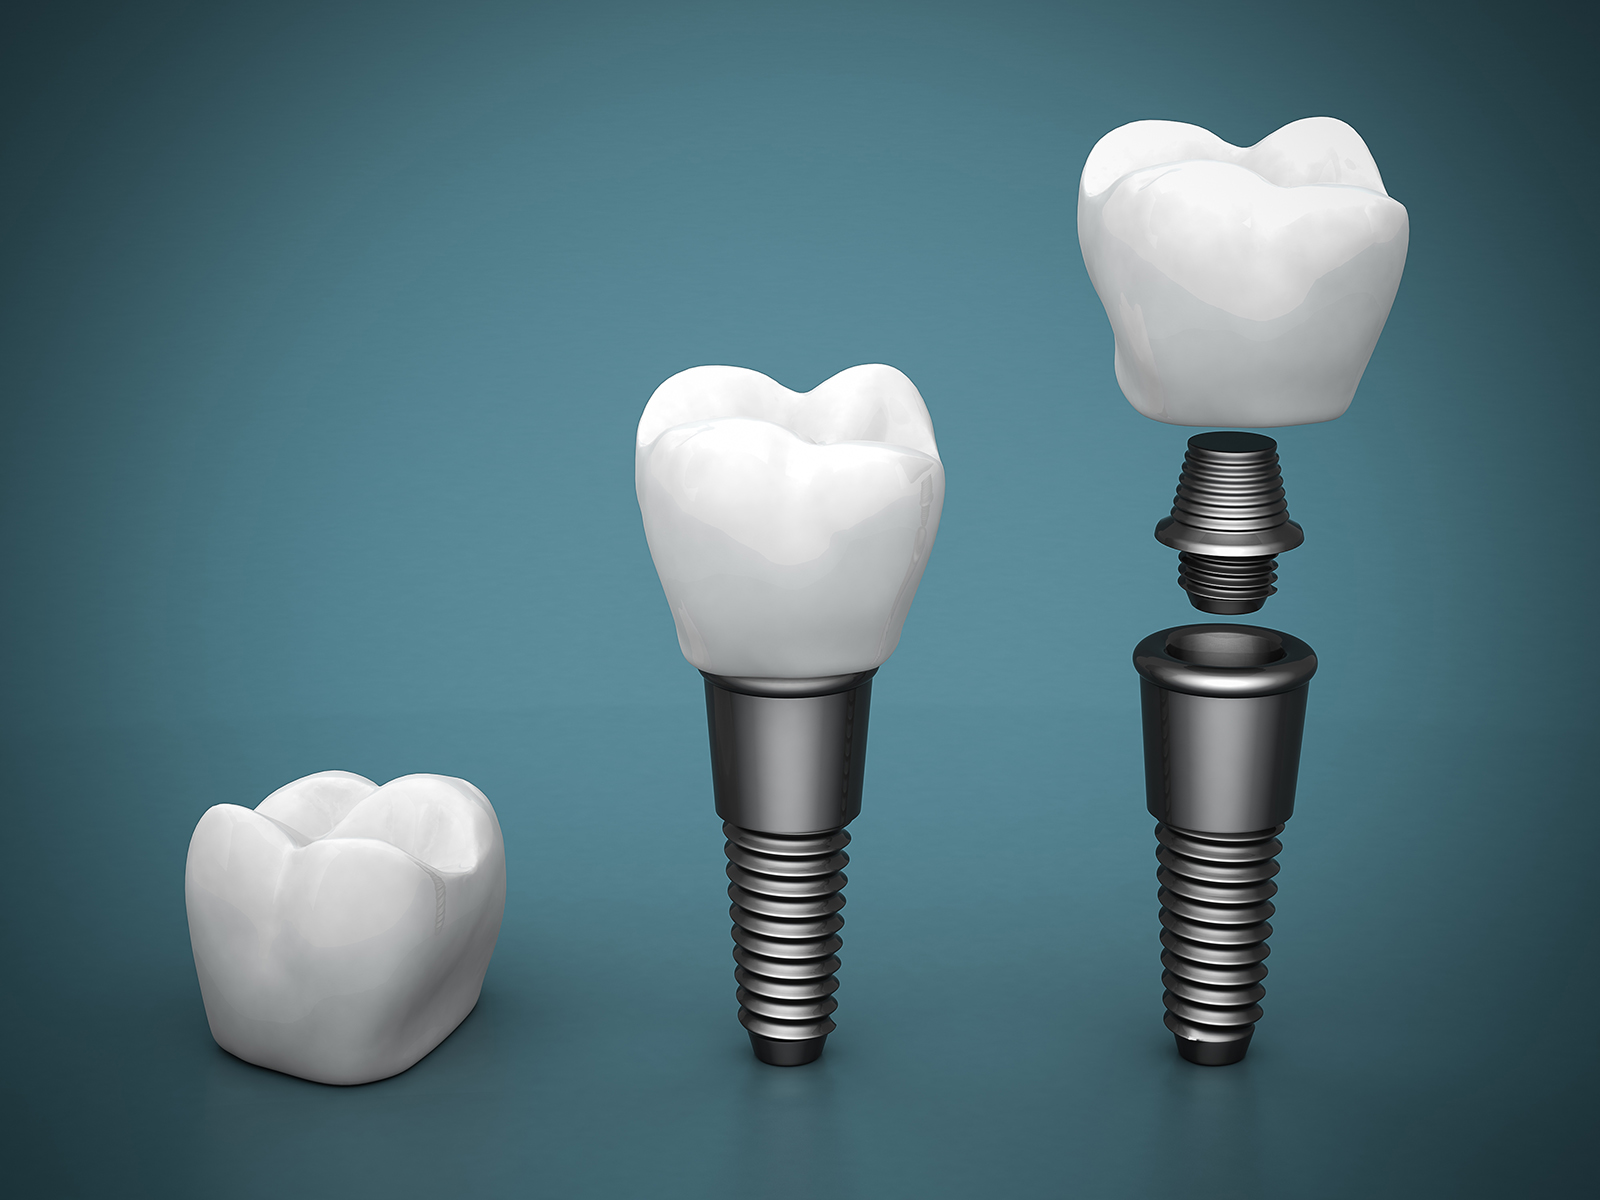 What is the difference between healing abutment and cover screw?